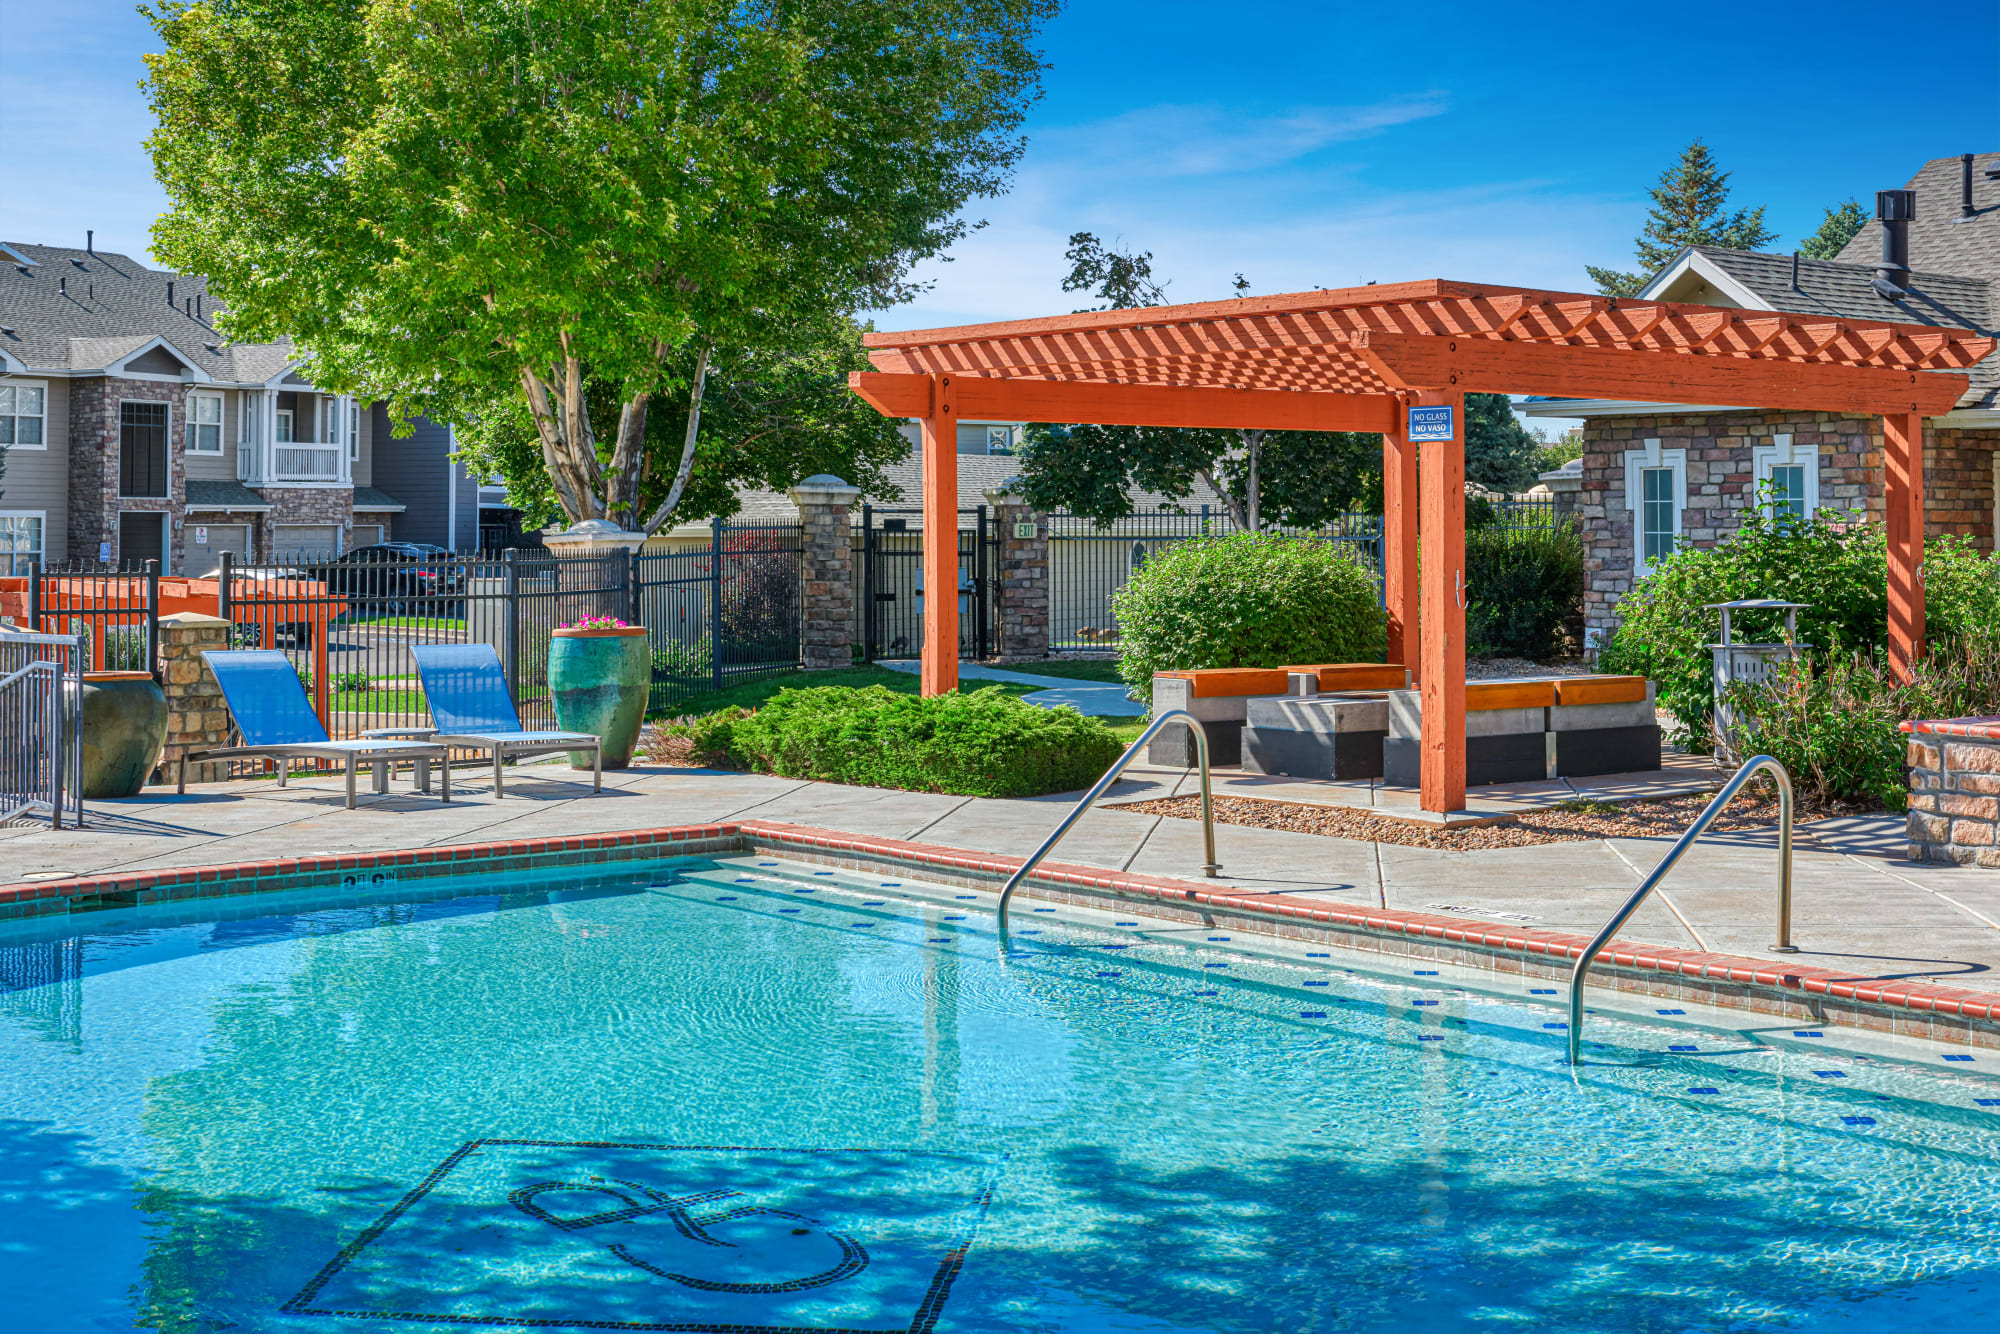 Poolside lounge area with a fire pit at Gateway Park Apartments in Denver, Colorado